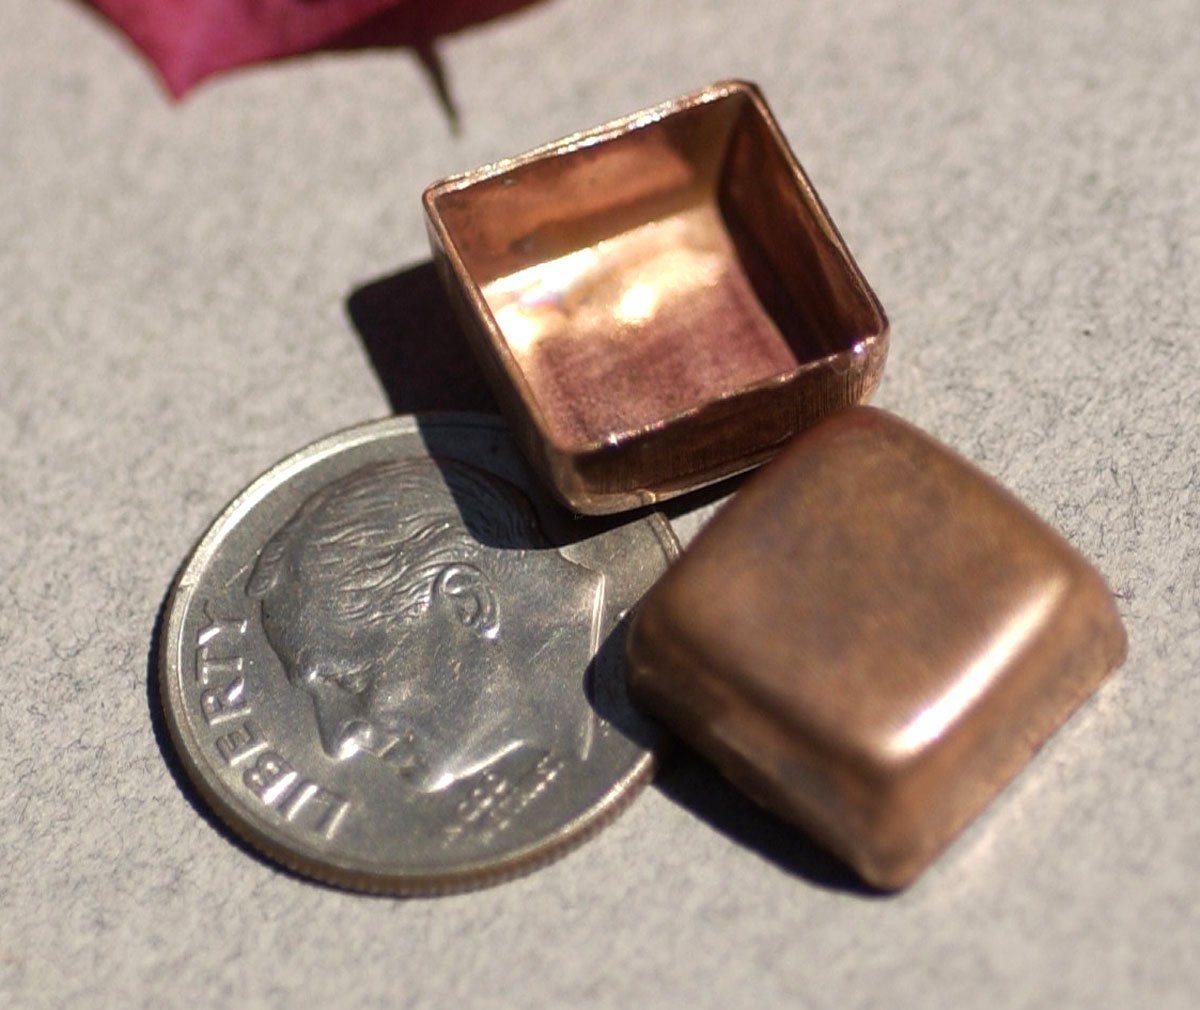 Copper Ends or Box or Bezel Cups - 24g 12mm Square Blanks Cutout for Enameling - 4 pieces